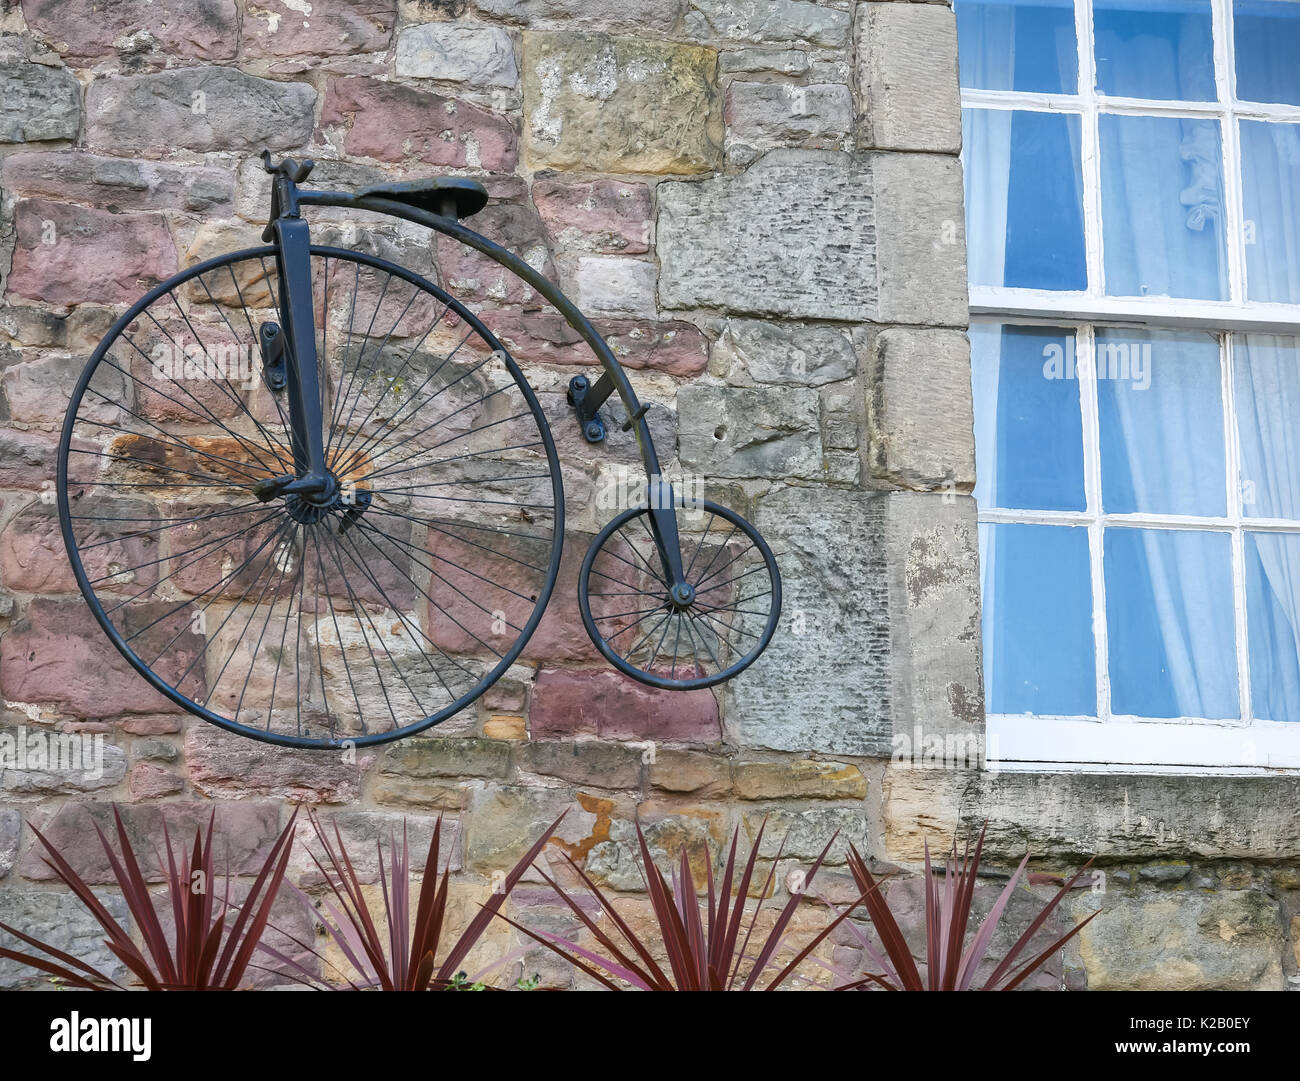 Old fashioned penny farthing bicycle model featured on stone wall of an old pub wall, Candlemaker Row, Edinburgh, Scotland, UK Stock Photo